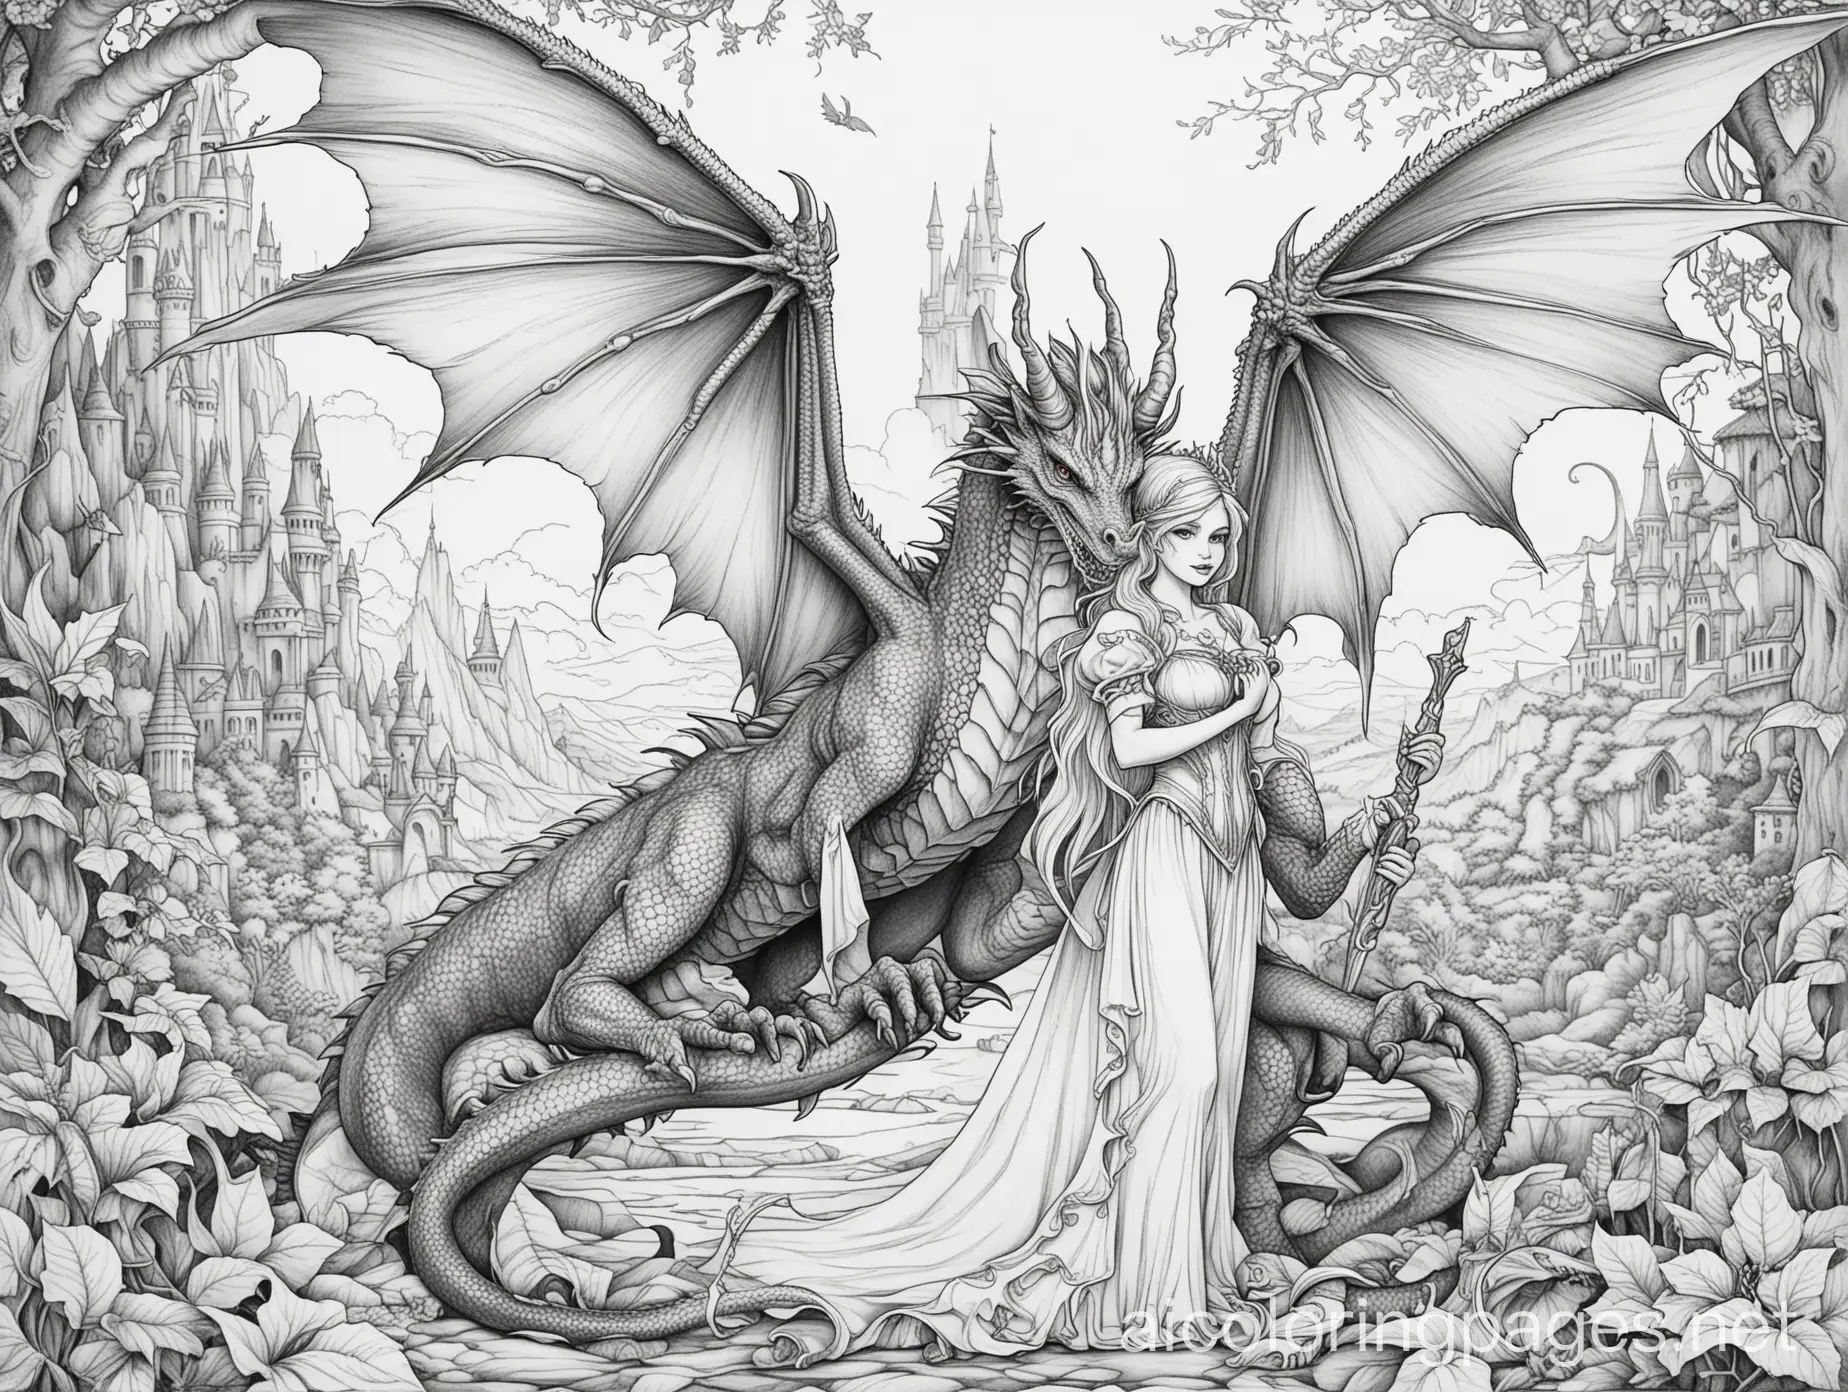 wicked  fairy and dragon scene adult  coloring pages, Coloring Page, black and white, line art, white background, Simplicity, Ample White Space. The background of the coloring page is plain white to make it easy for young children to color within the lines. The outlines of all the subjects are easy to distinguish, making it simple for kids to color without too much difficulty